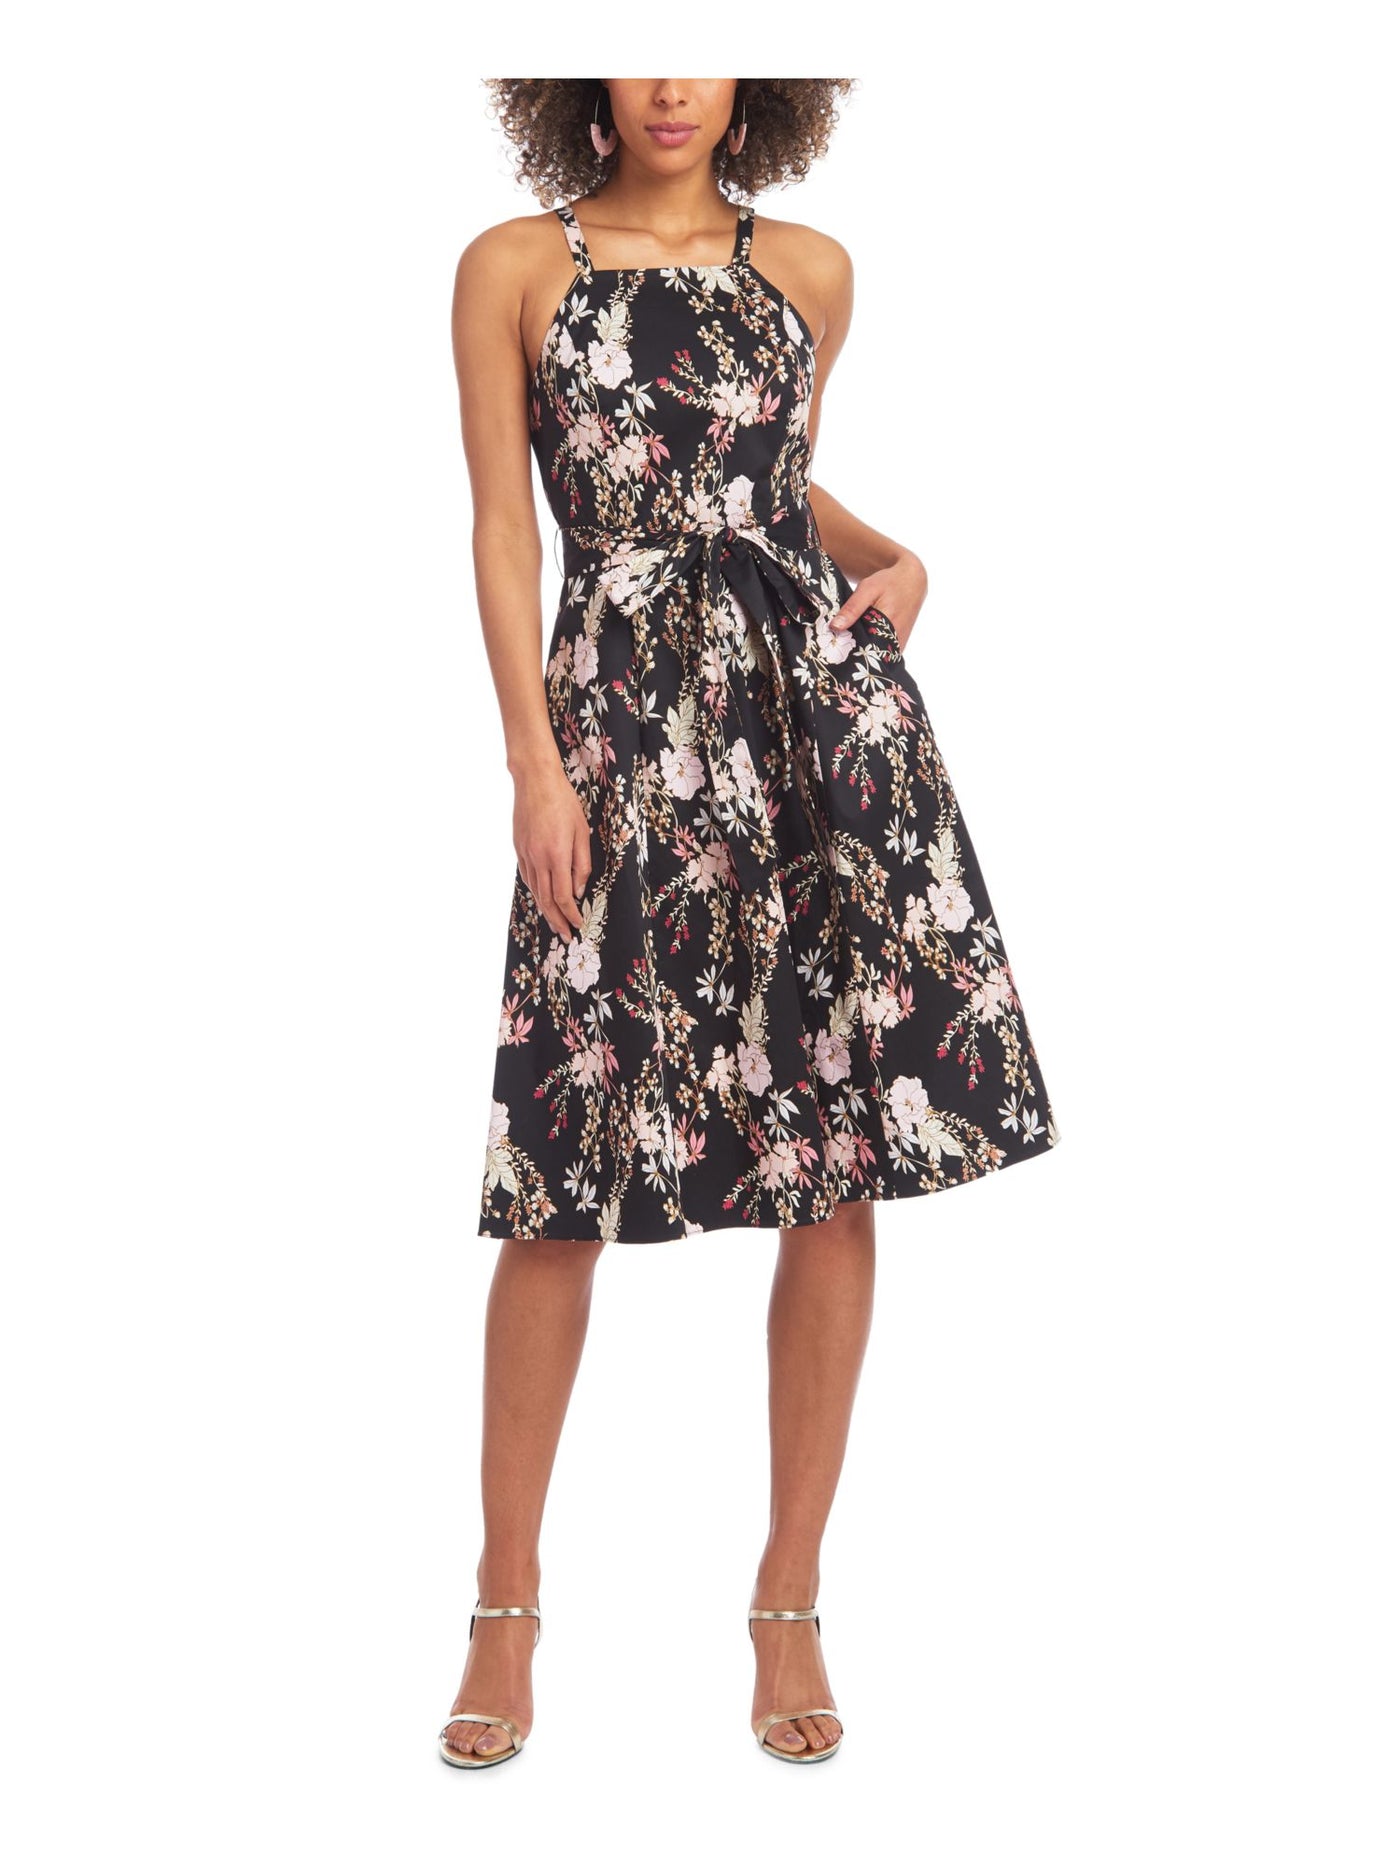 RACHEL RACHEL ROY Womens Black Pocketed Zippered Floral Spaghetti Strap Square Neck Knee Length Evening Fit + Flare Dress 0